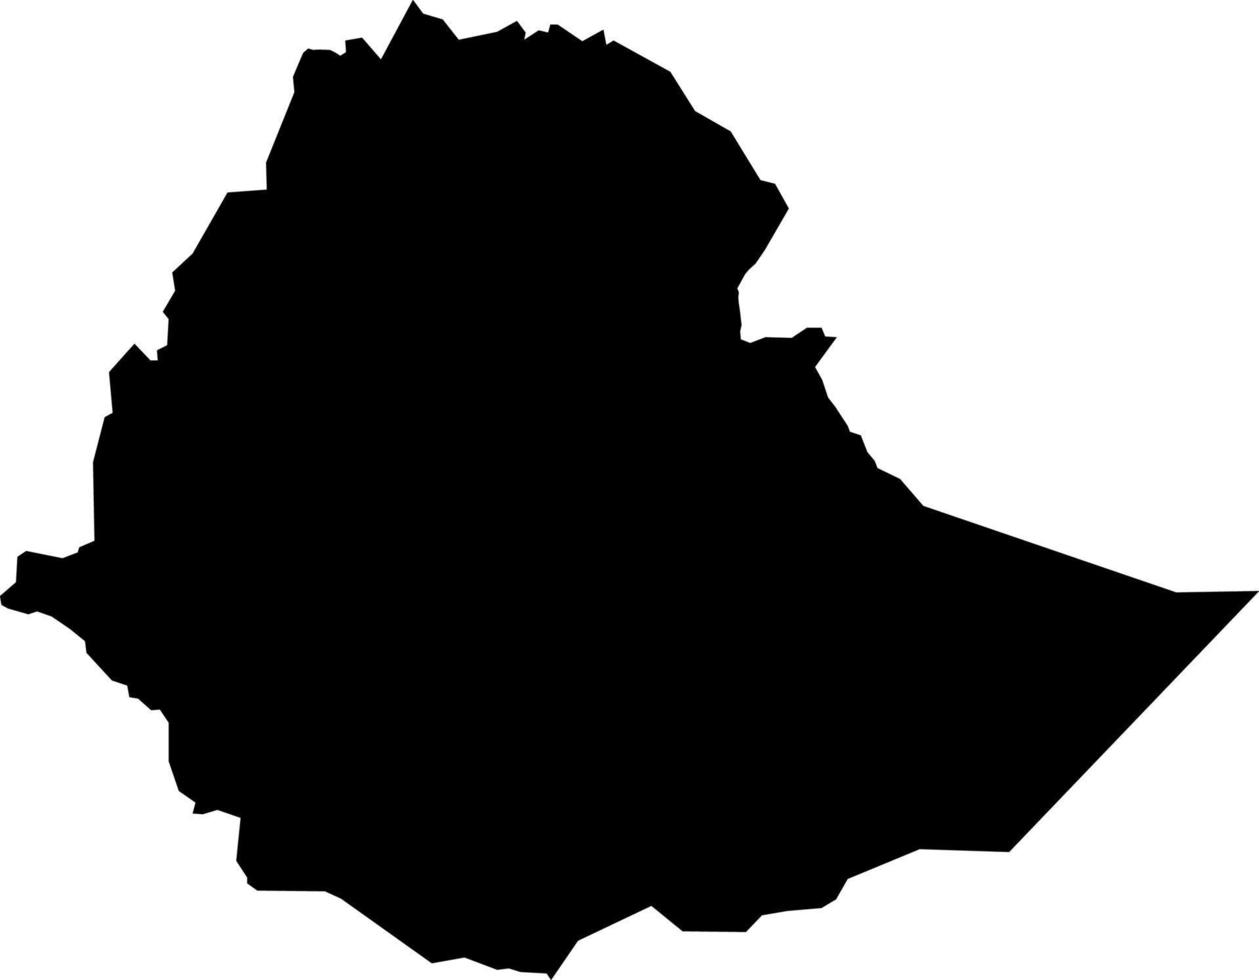 Africa Ethiopia map vector map.Hand drawn minimalism style.